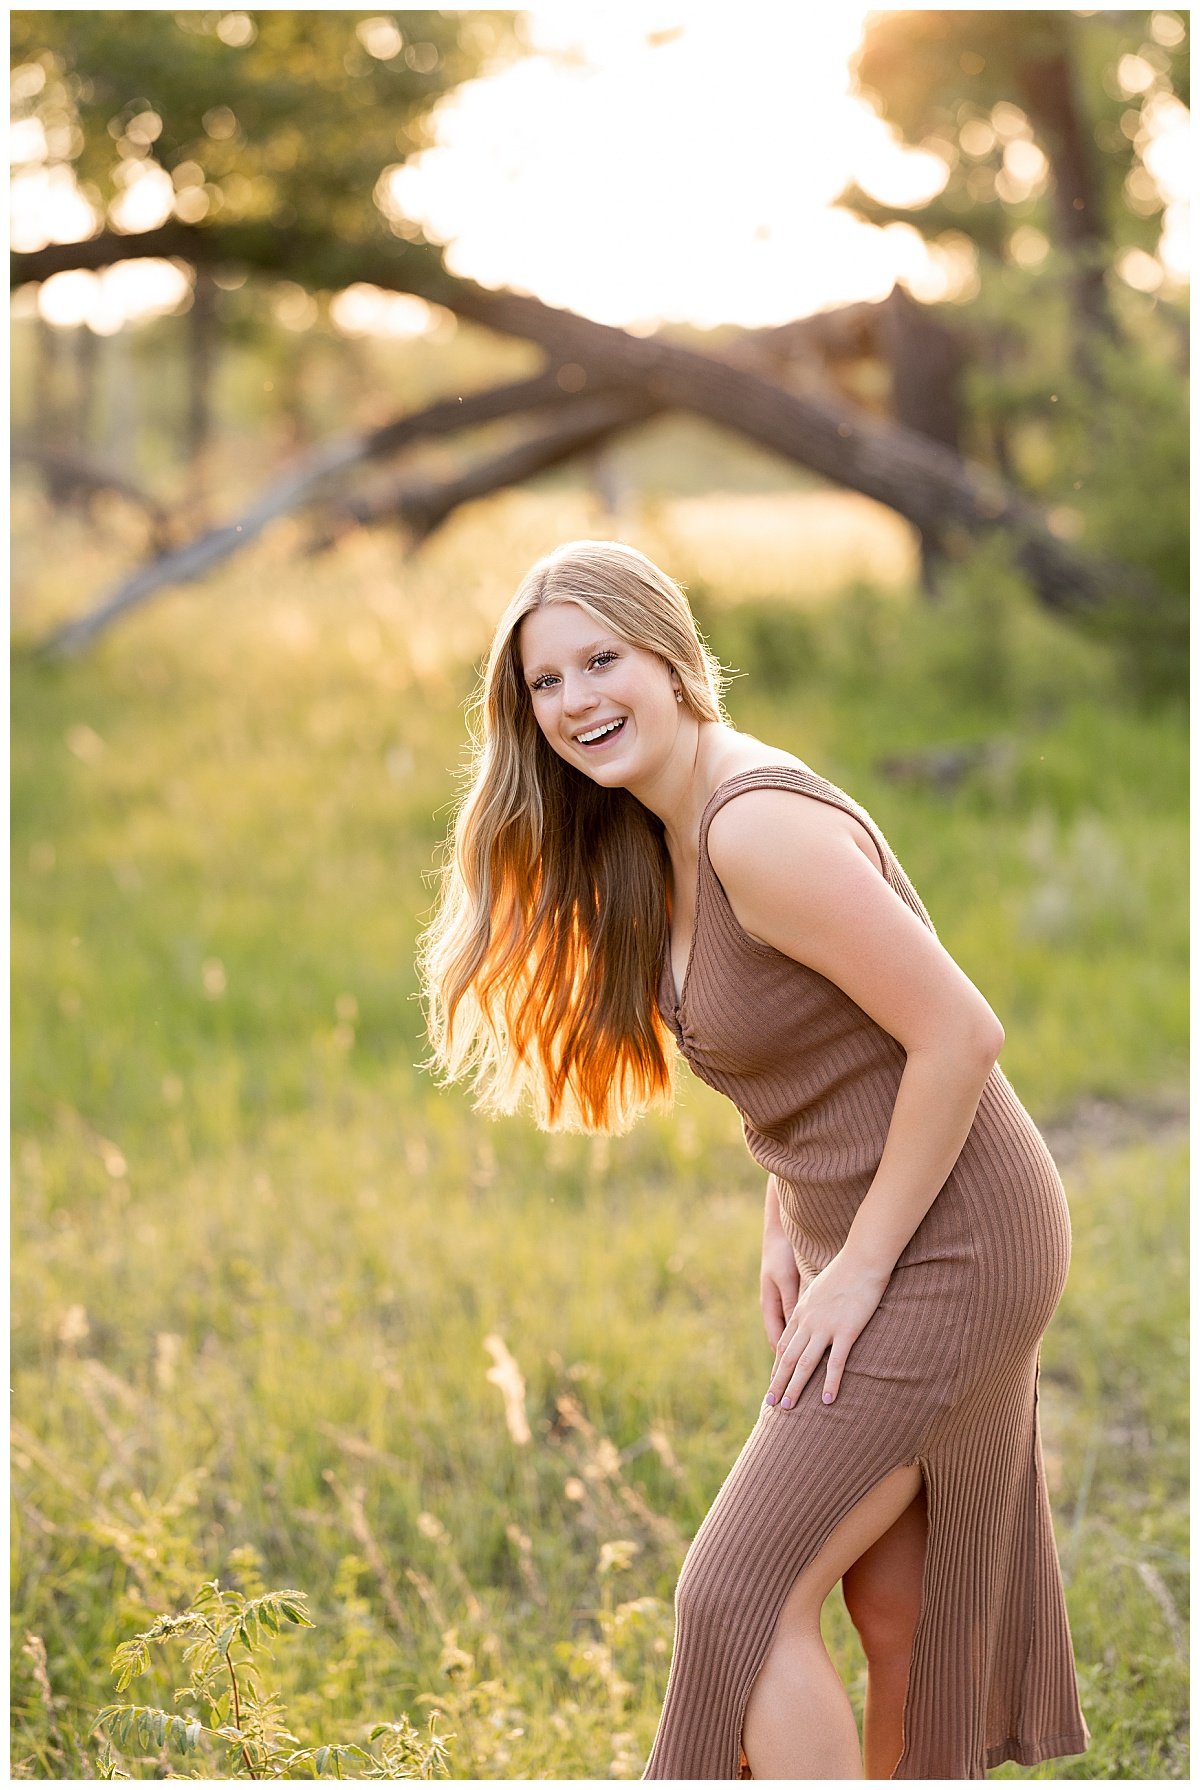 A young woman wearing a brown, knit dress smiles in the golden hour sunlight in North Dakota during an outdoor session with Kellie Rochelle Photography.